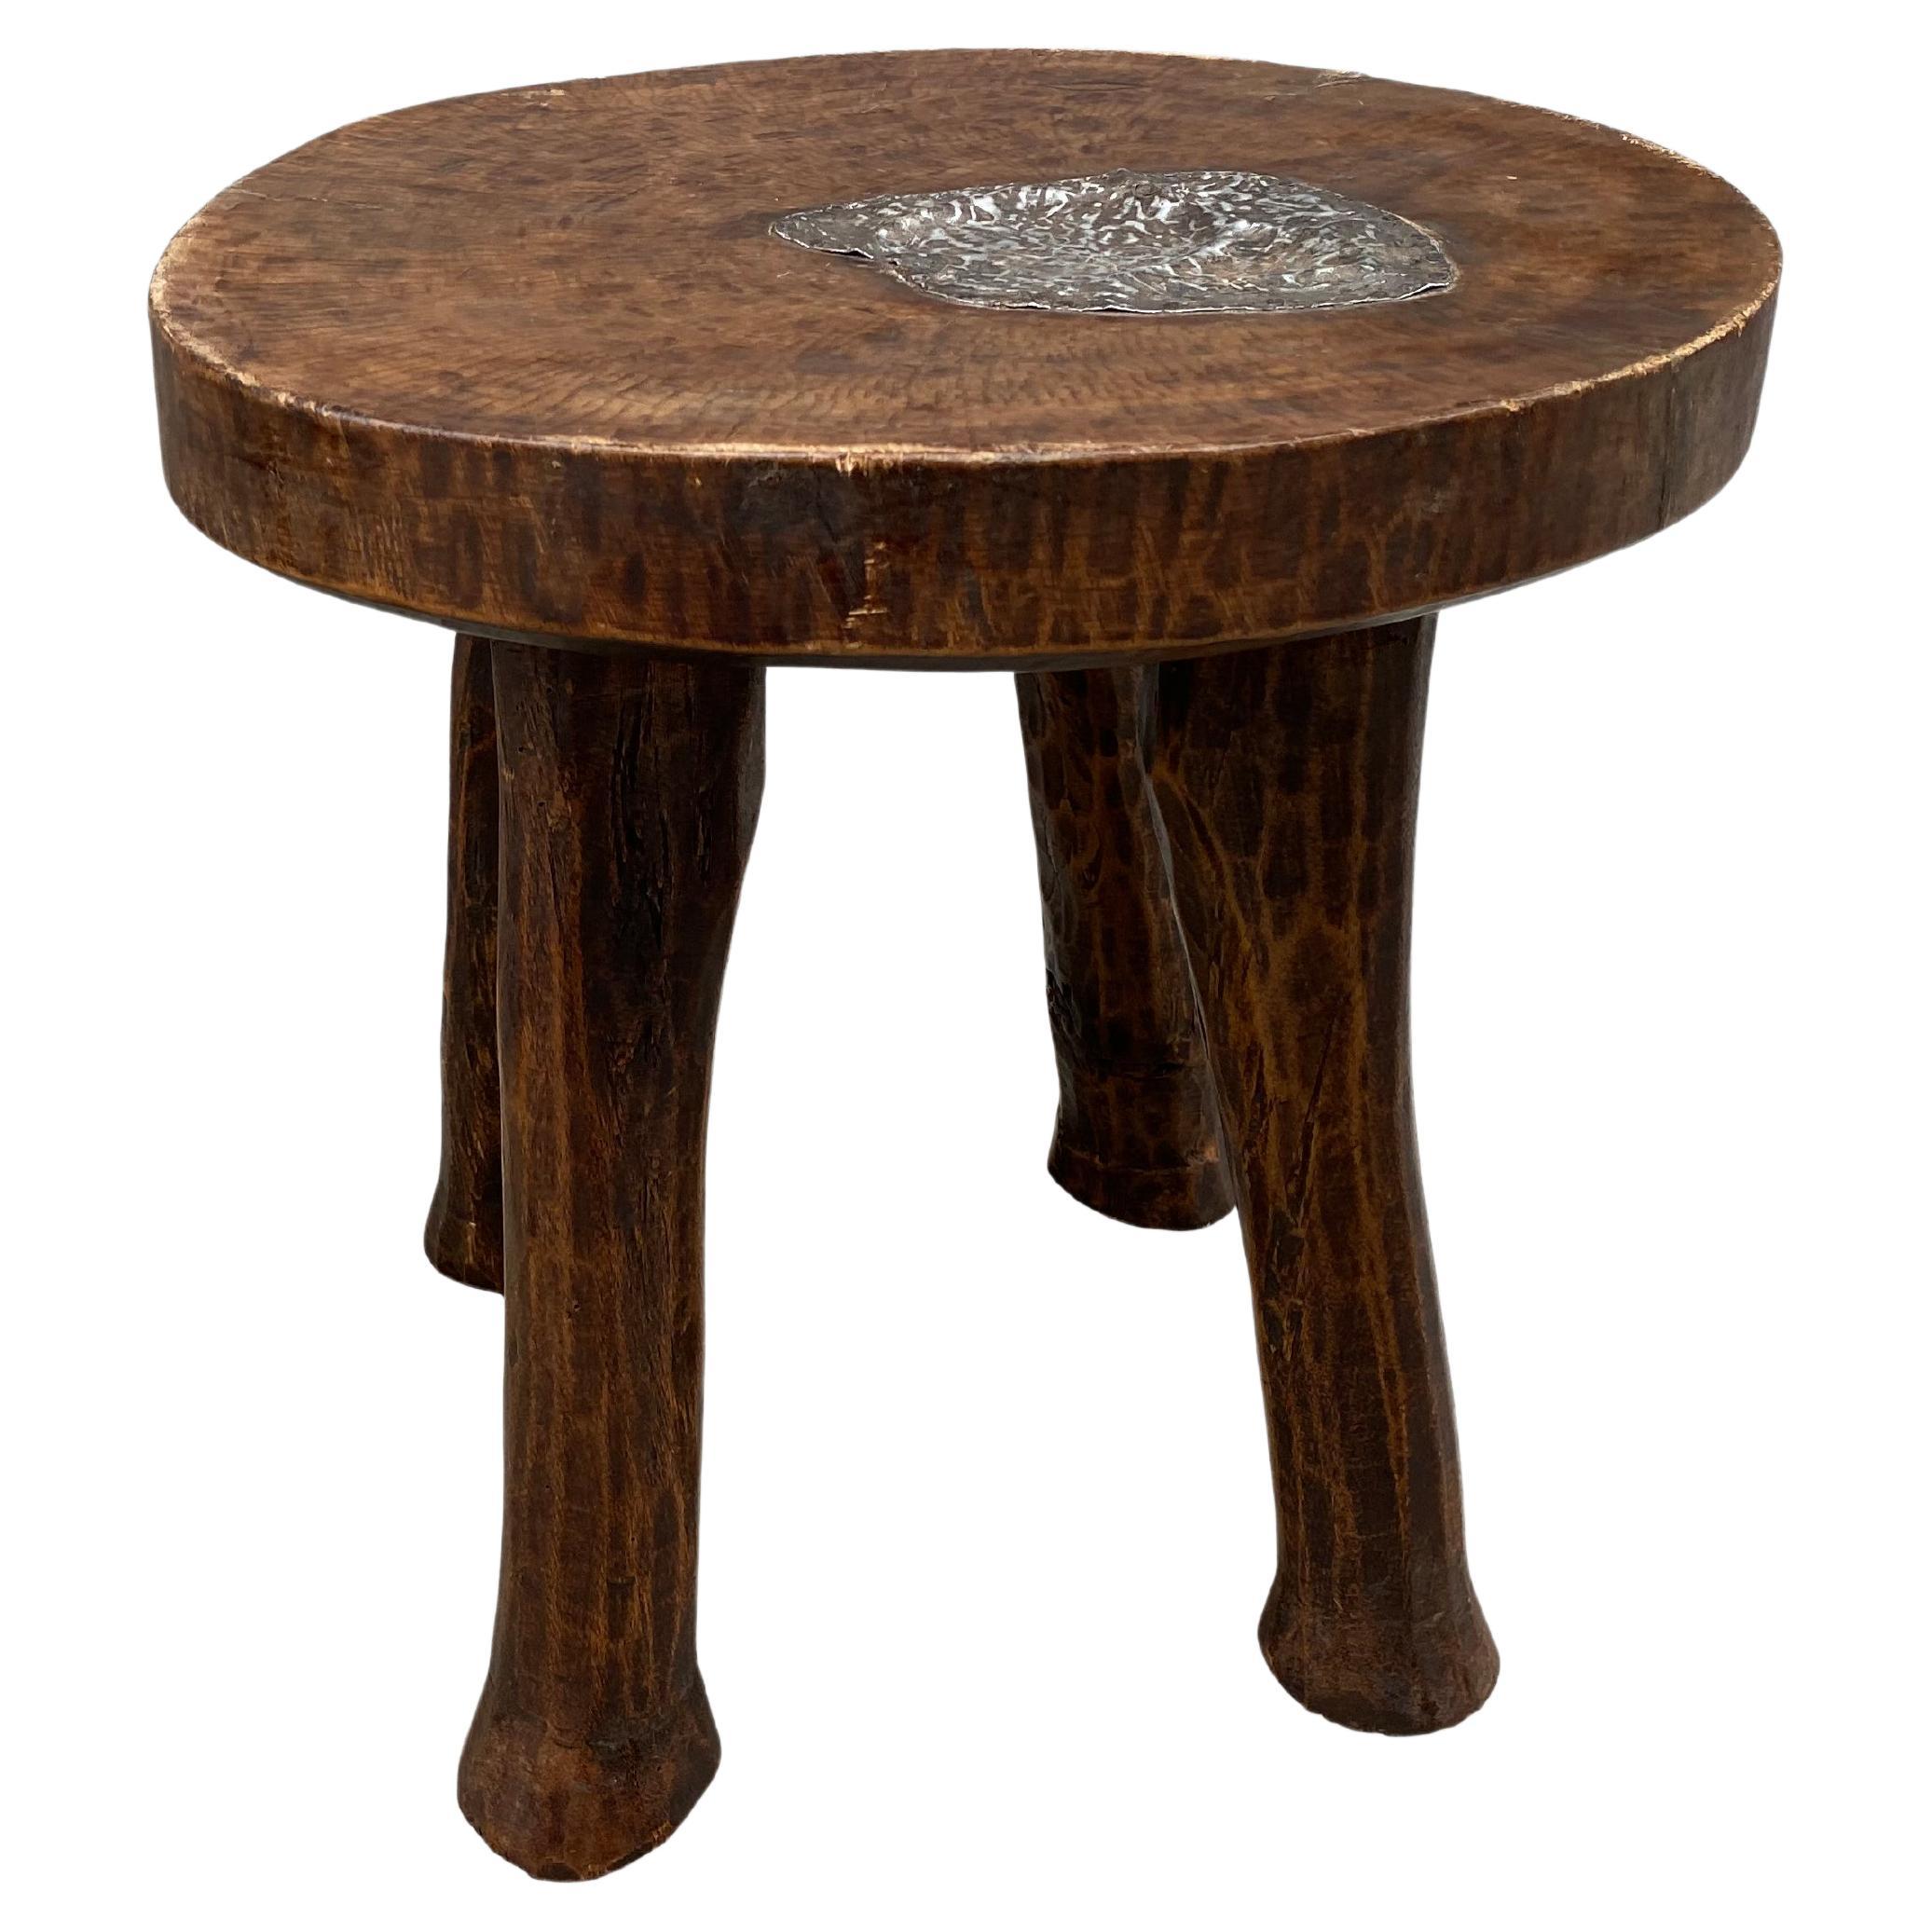 Andrianna Shamaris Antique African Mahogany Wood Sculptural Side Table